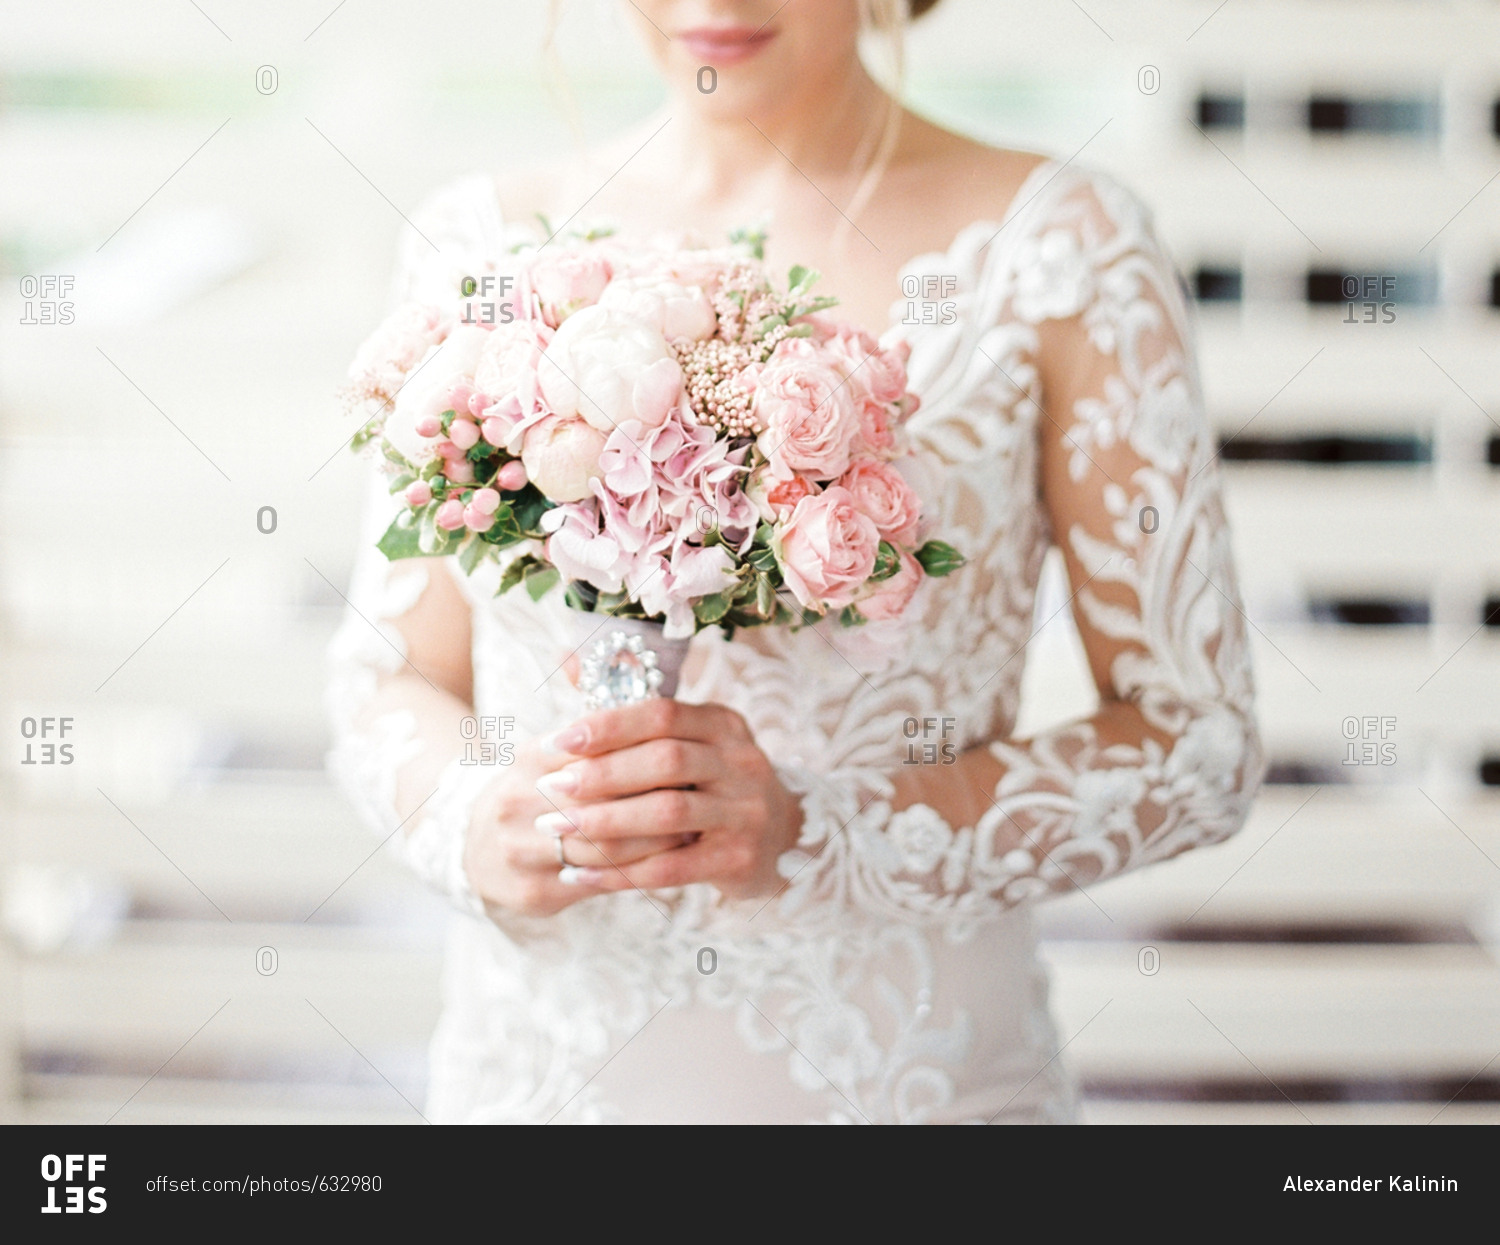 Bride holding wedding bouquet with pink flowers